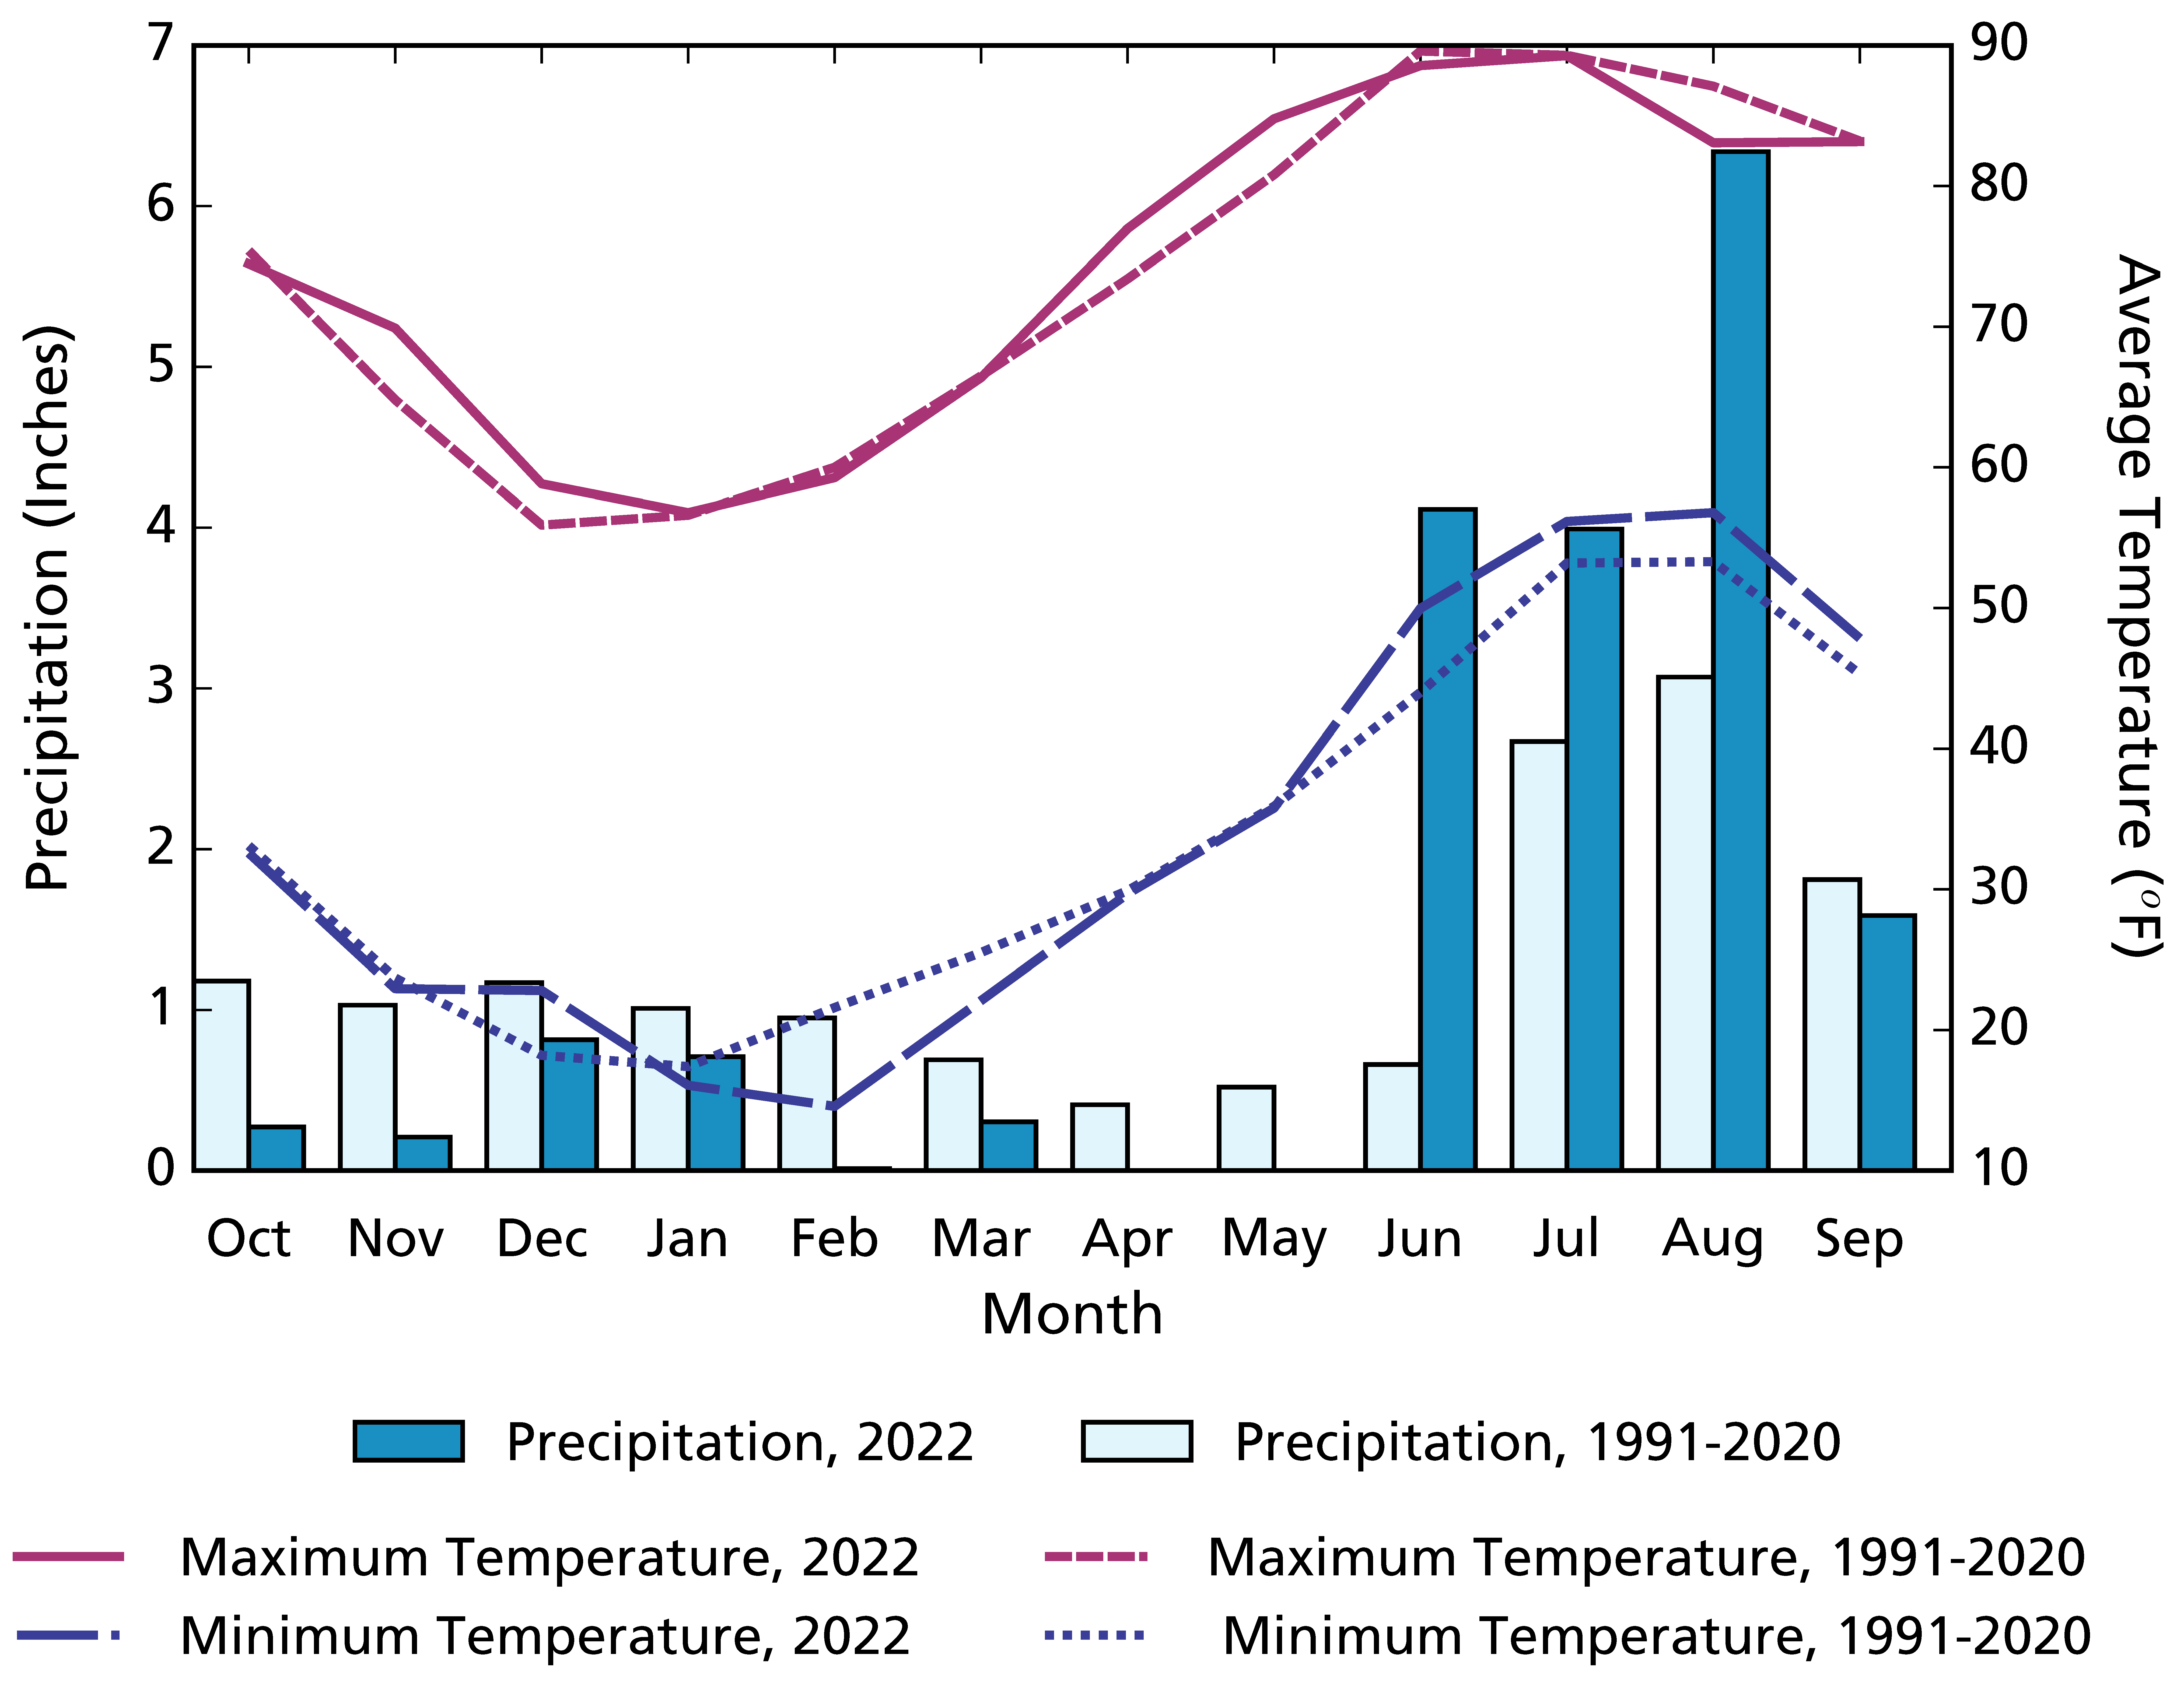 Climogram plotting monthly precipitation of 2022 compared to the 1991-2020 average, as well as the monthly maximum and minimum temperatures of 2022 compared to the past average.